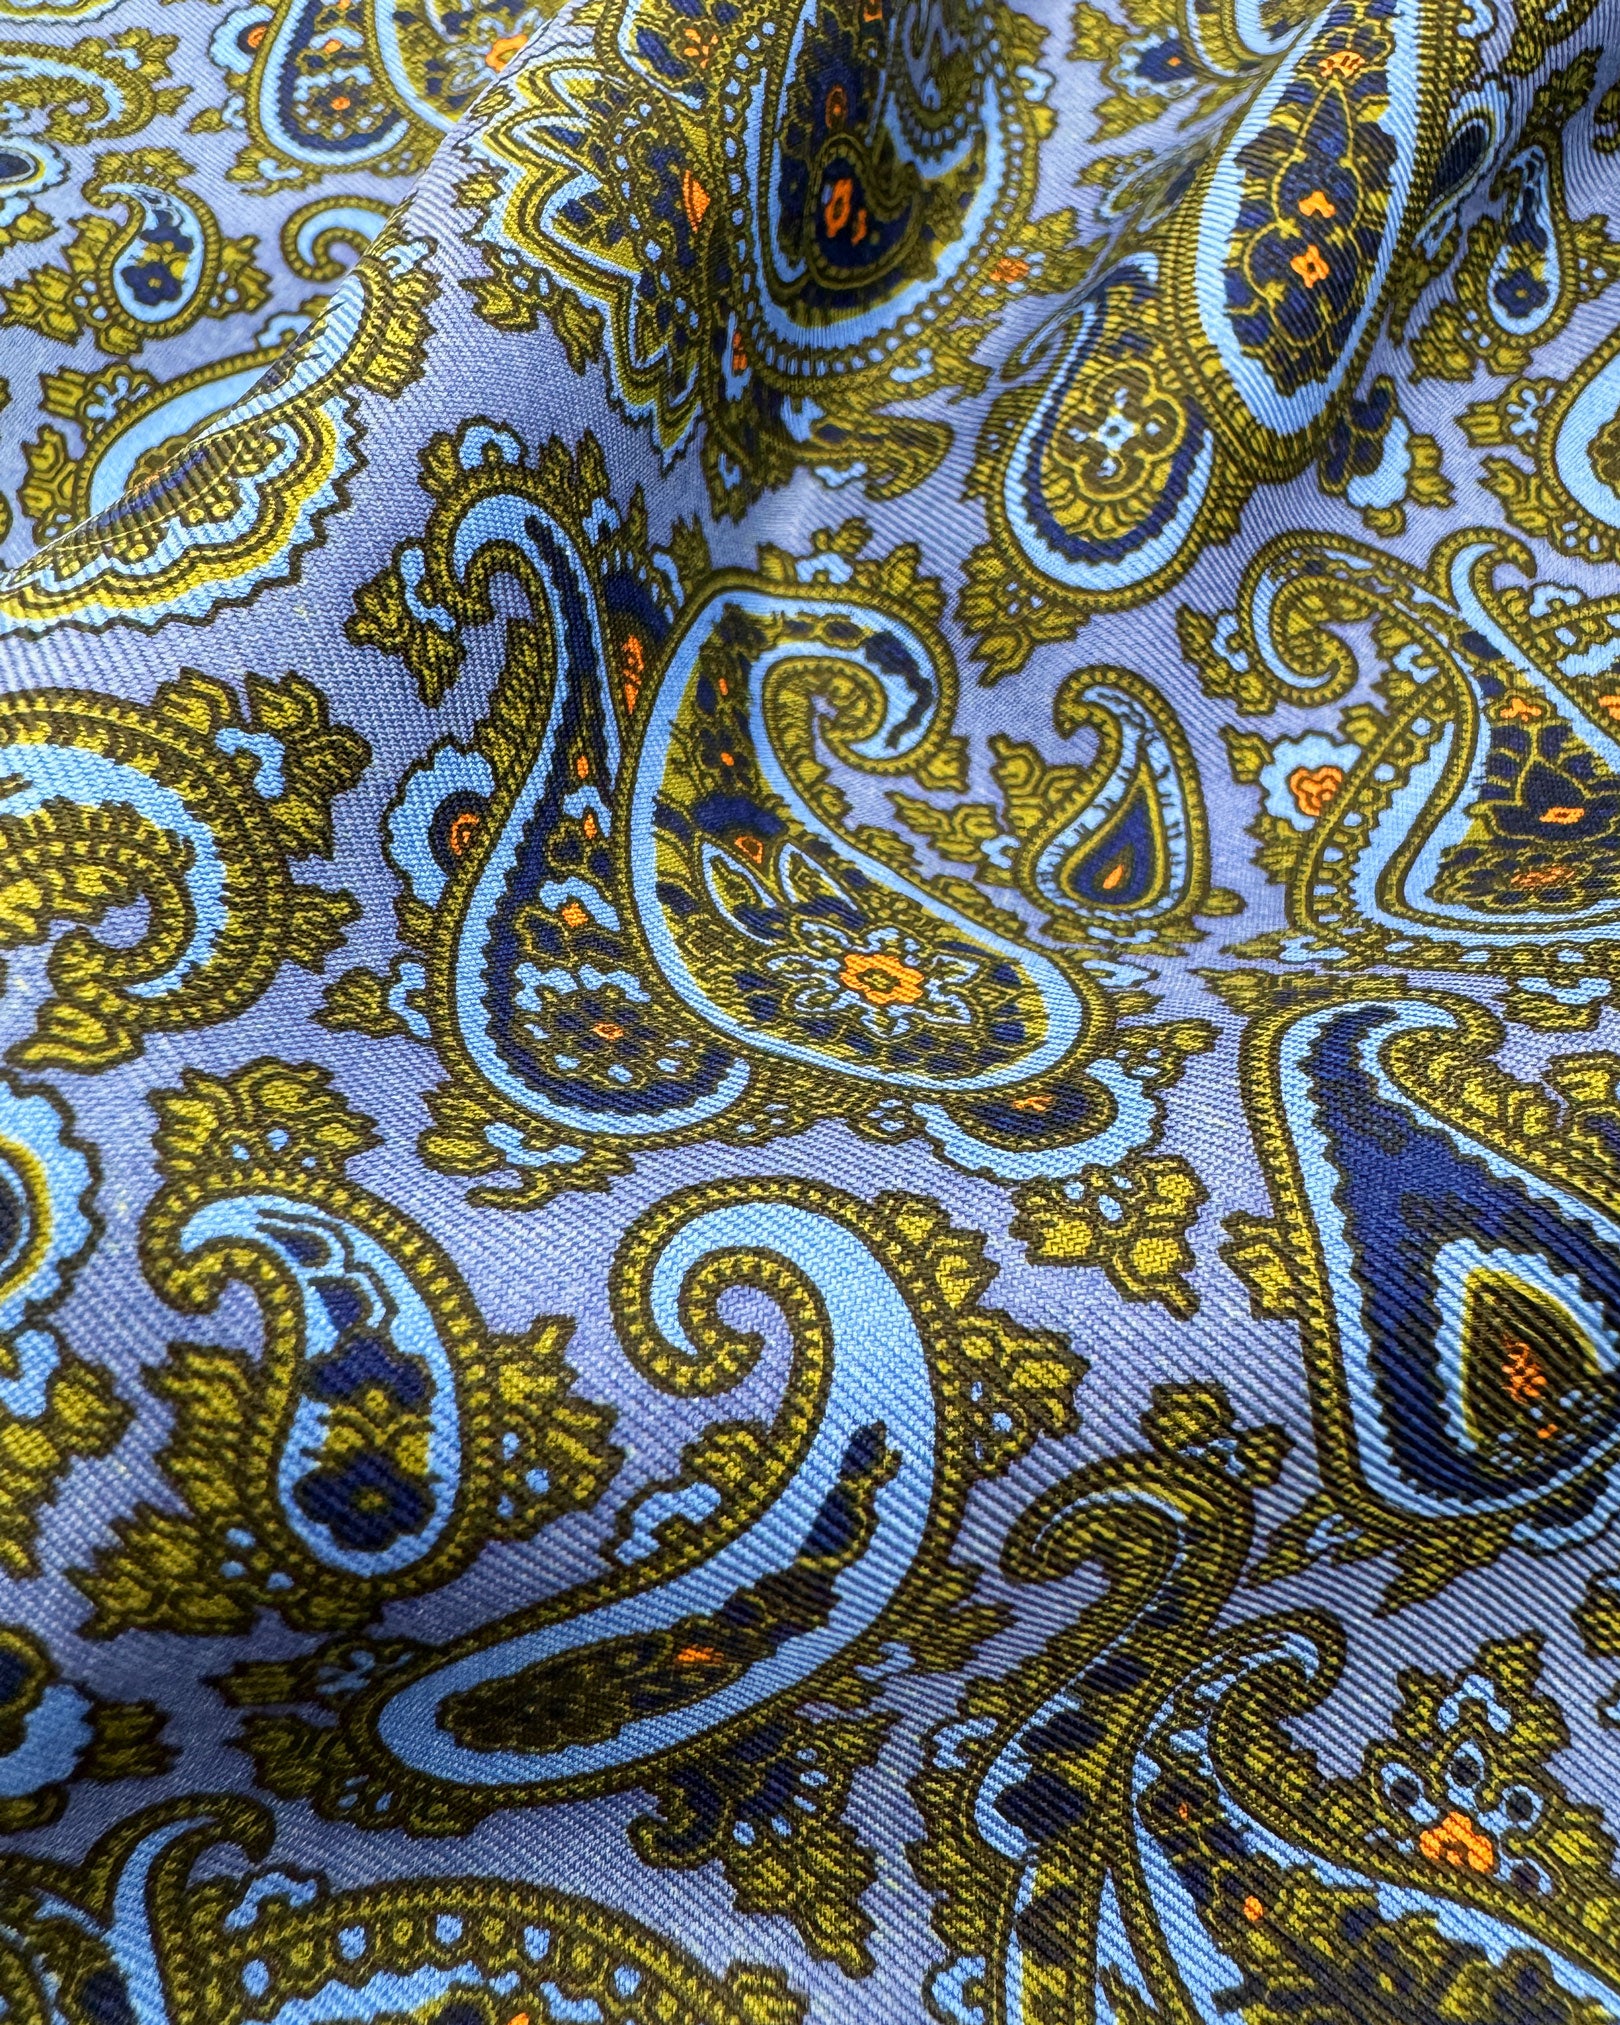 A ruffled close-up of the 'Acton' pocket square, presenting a closer view of the lime green and blue paisley patterns against the attractive lustre of the madder silk material. 